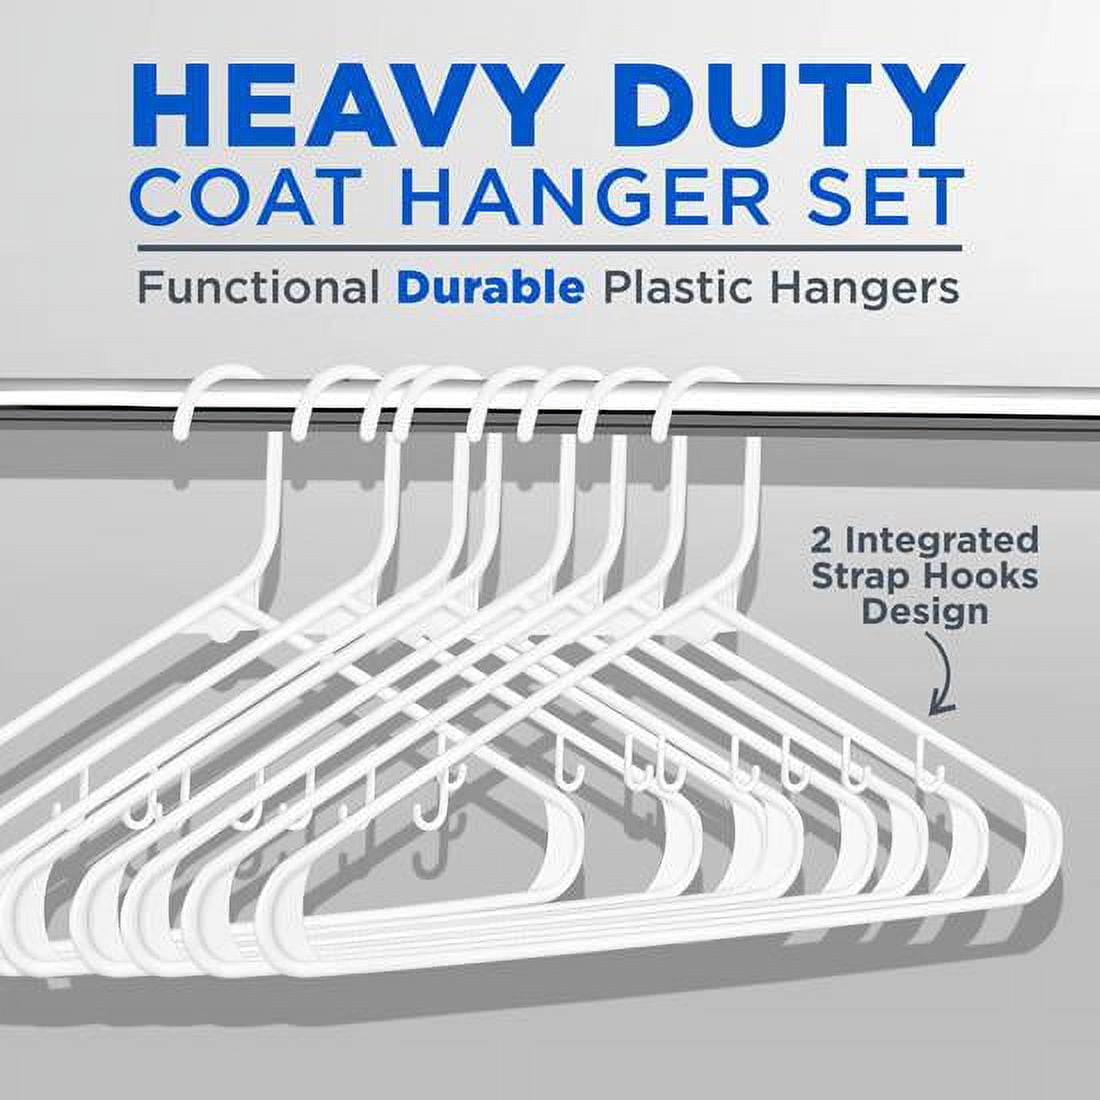 Heshberg Plastic Hooks Hangers Space Saving Tubular Clothes Hangers Standard Size Ideal for Everyday Use on Shirts, Coats, Pants